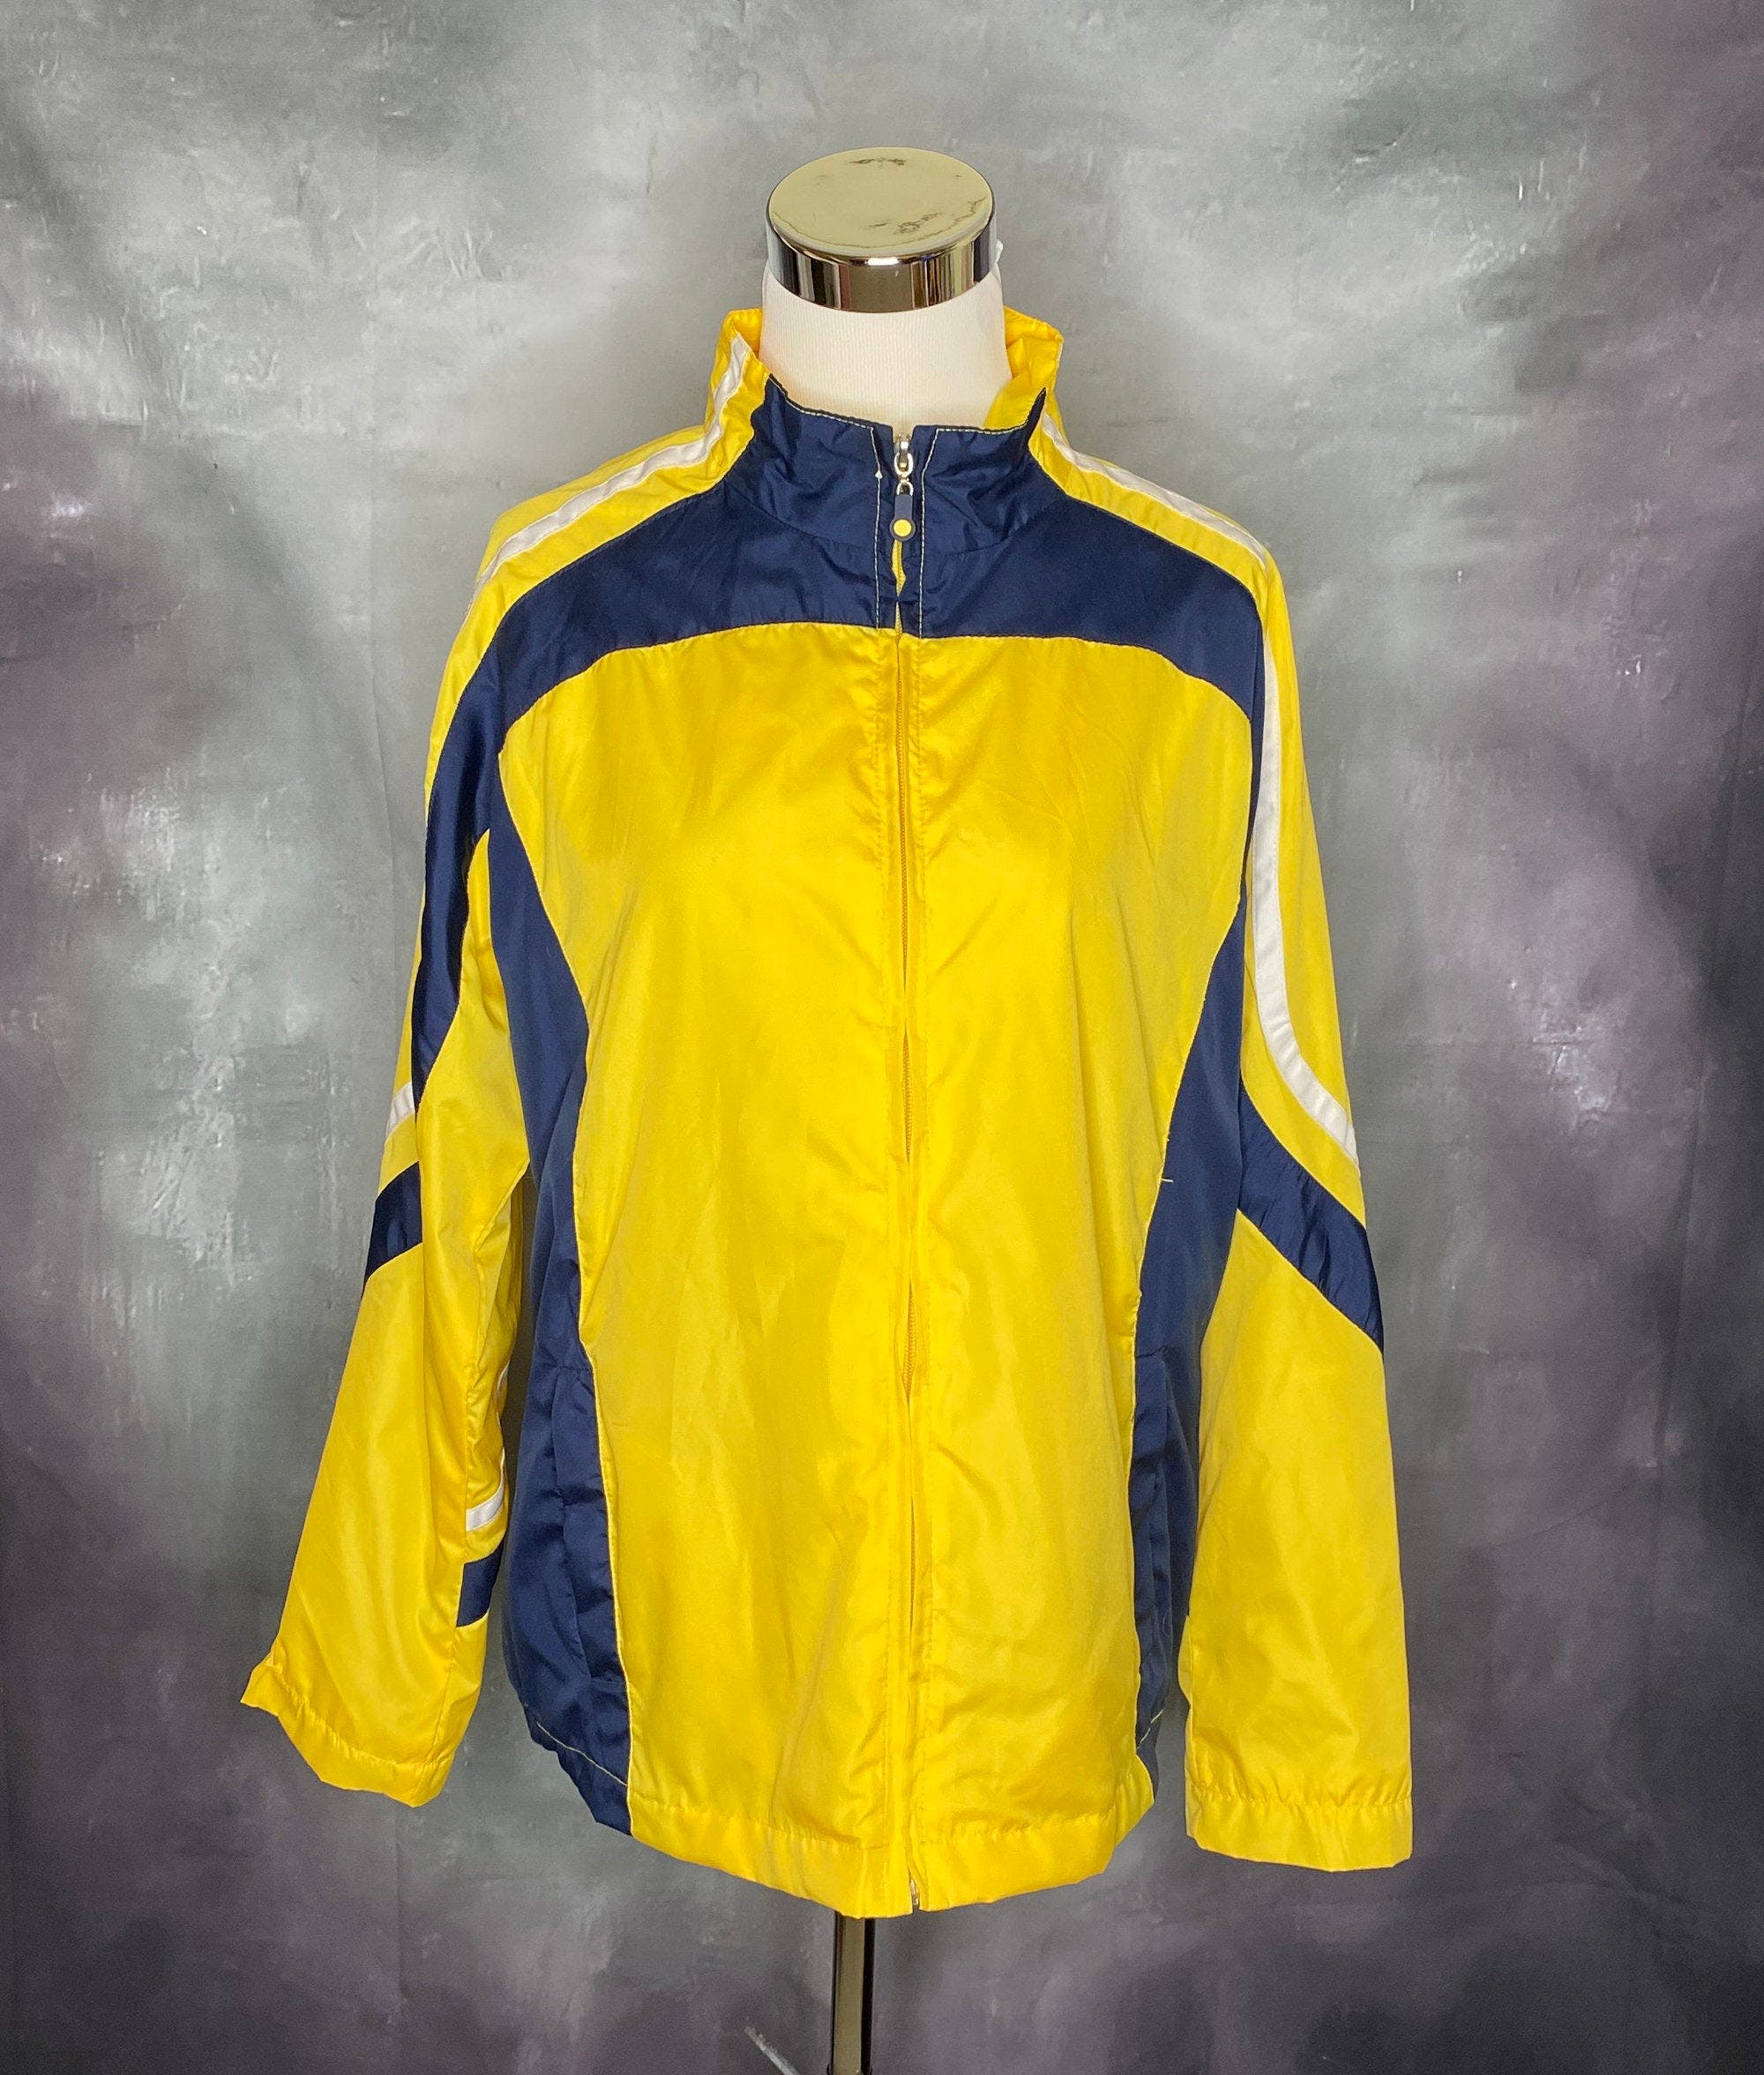 Vintage 90's Yellow and Navy Windbreaker Jacket by Studio Works | Shop ...